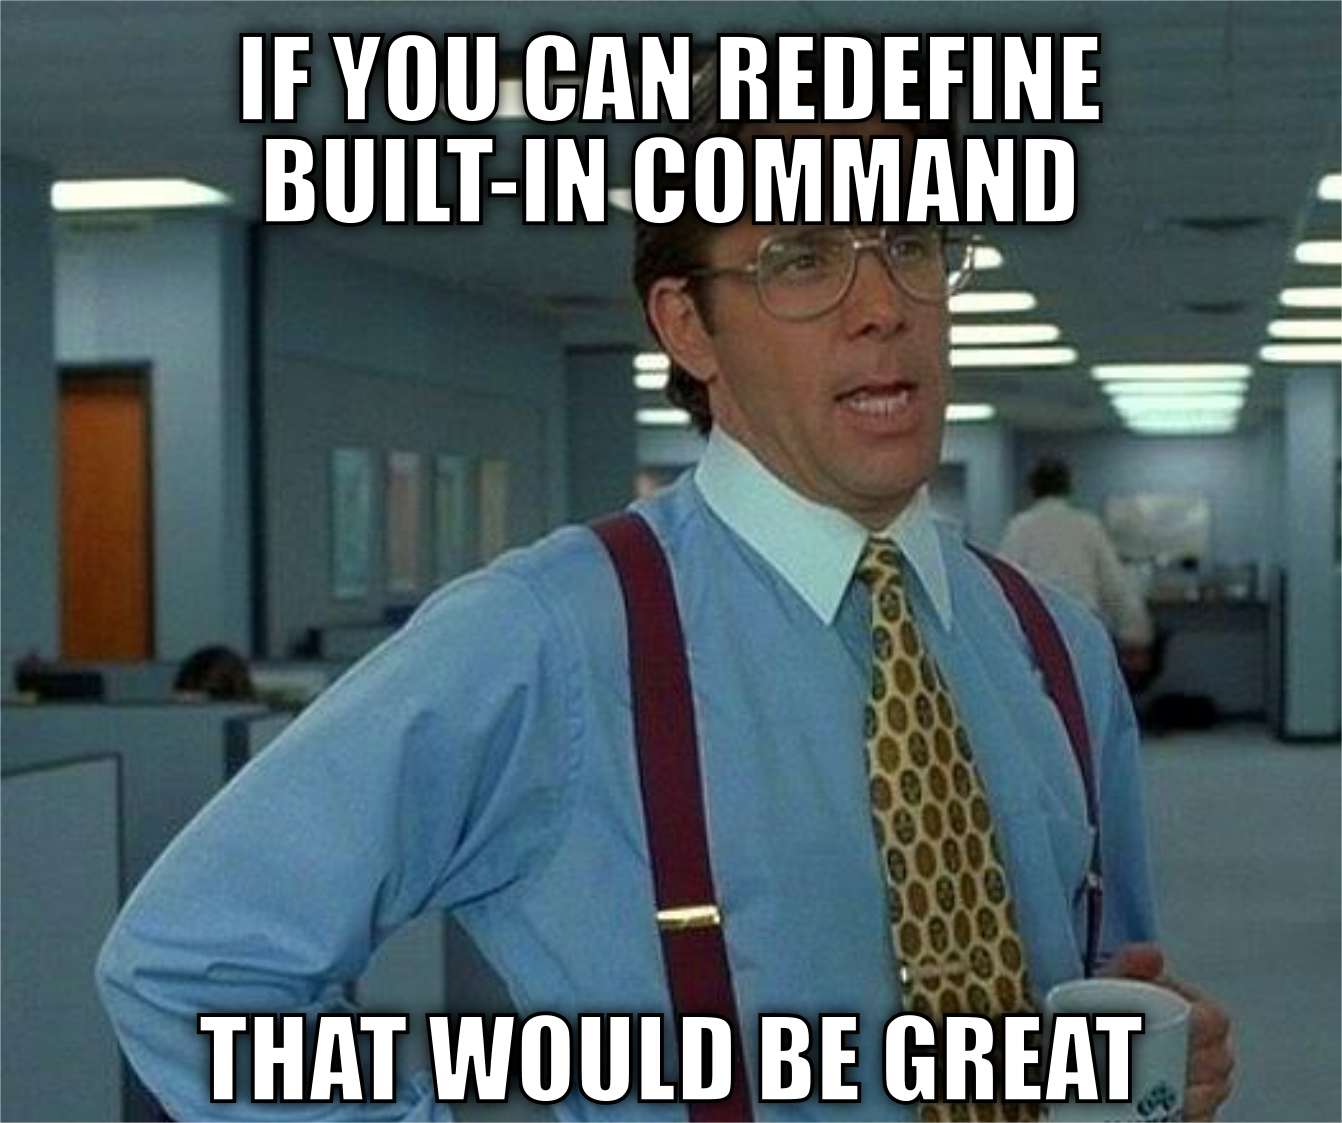 If you can redefine built-in command, that would be great.